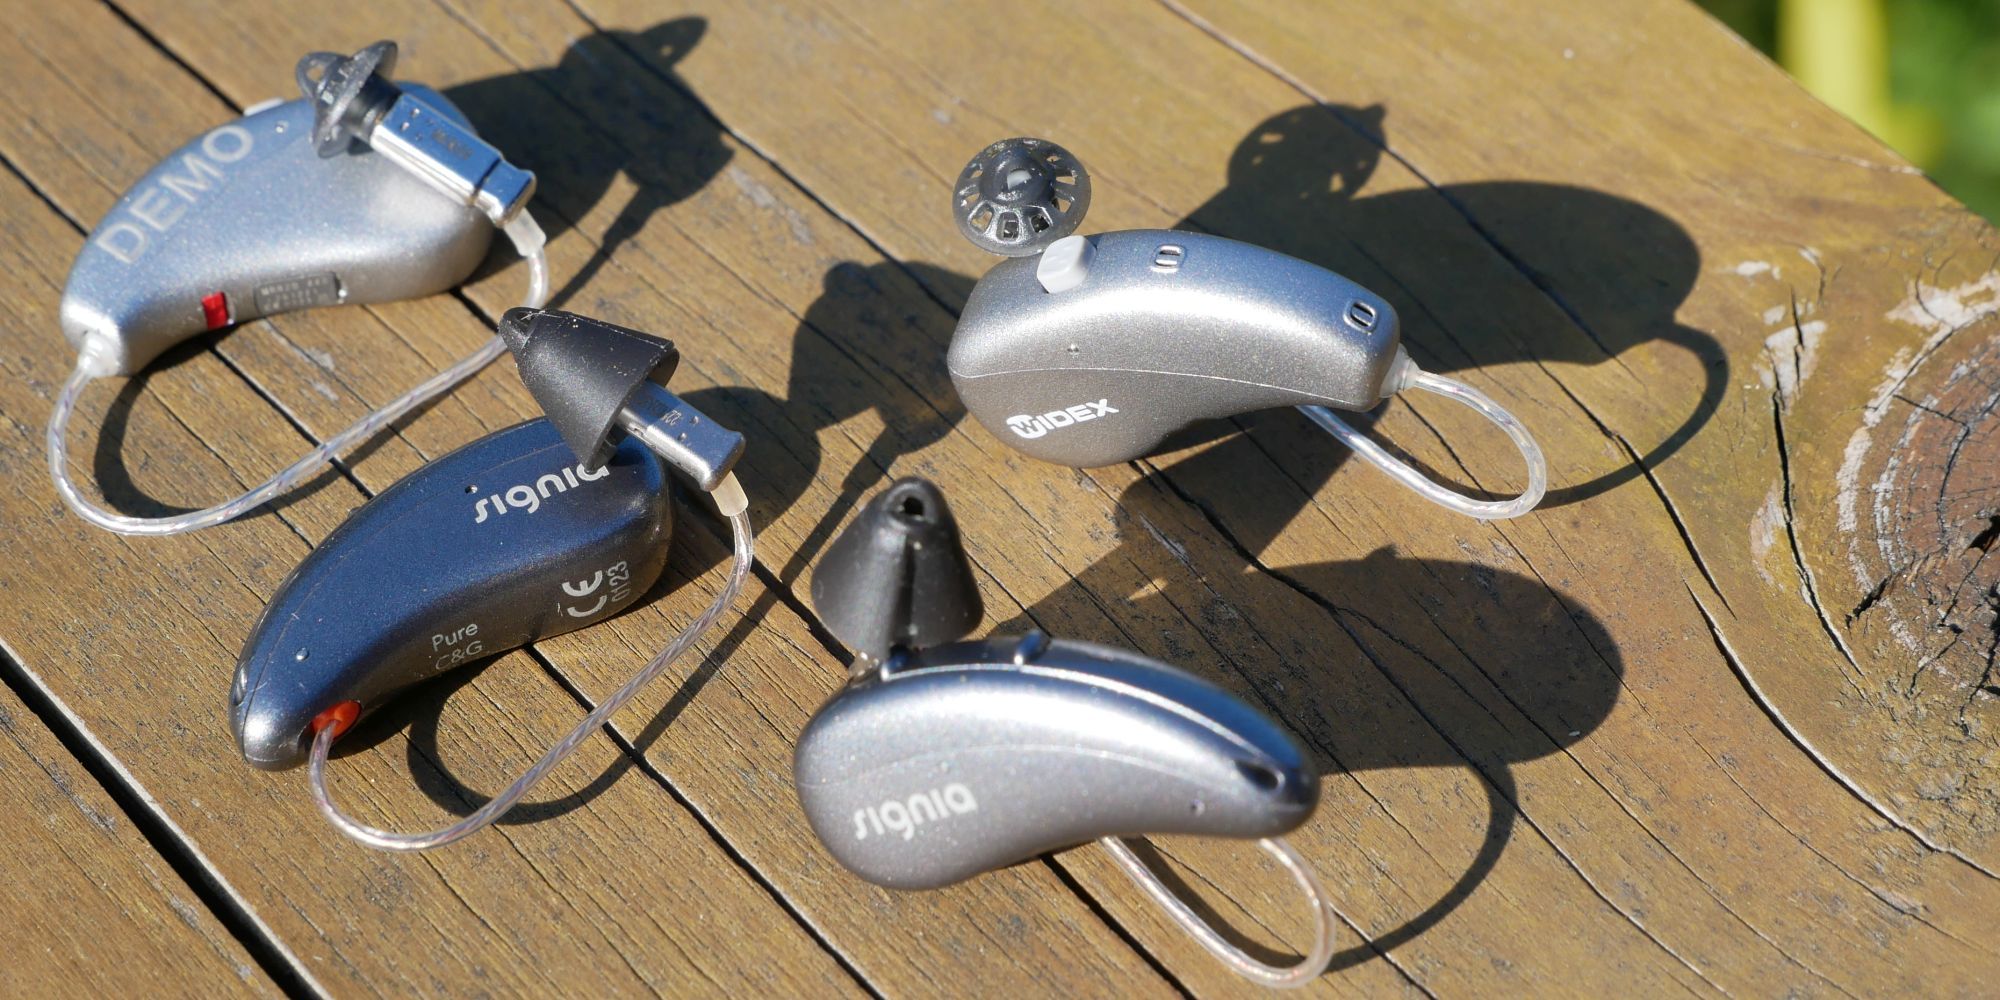 Signia Pure Charge&amp;Go AX next to slightly larger Widex MOMENT hearing aids.